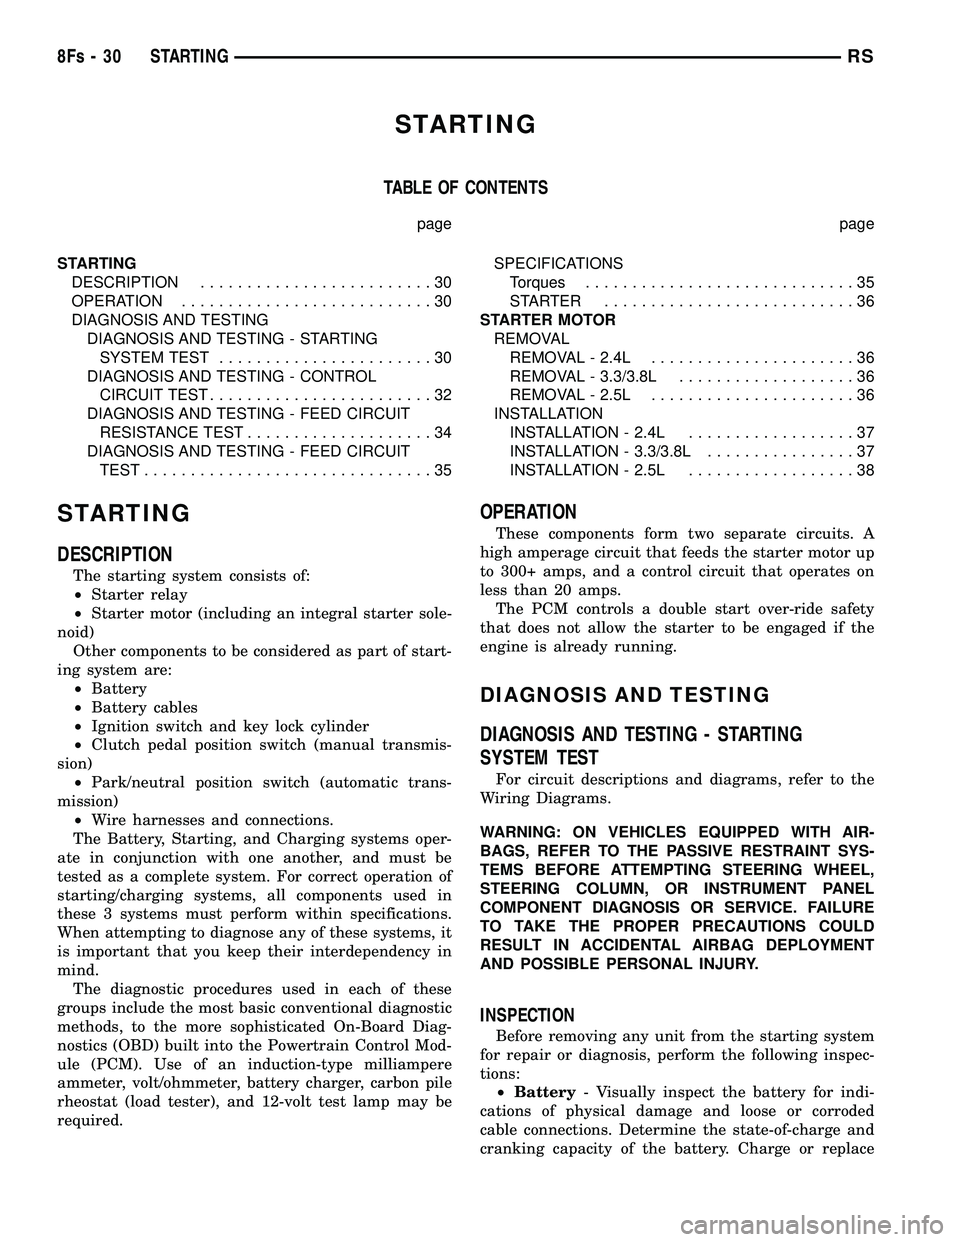 DODGE TOWN AND COUNTRY 2004  Service Manual STARTING
TABLE OF CONTENTS
page page
STARTING DESCRIPTION .........................30
OPERATION ...........................30
DIAGNOSIS AND TESTING DIAGNOSIS AND TESTING - STARTINGSYSTEM TEST ........